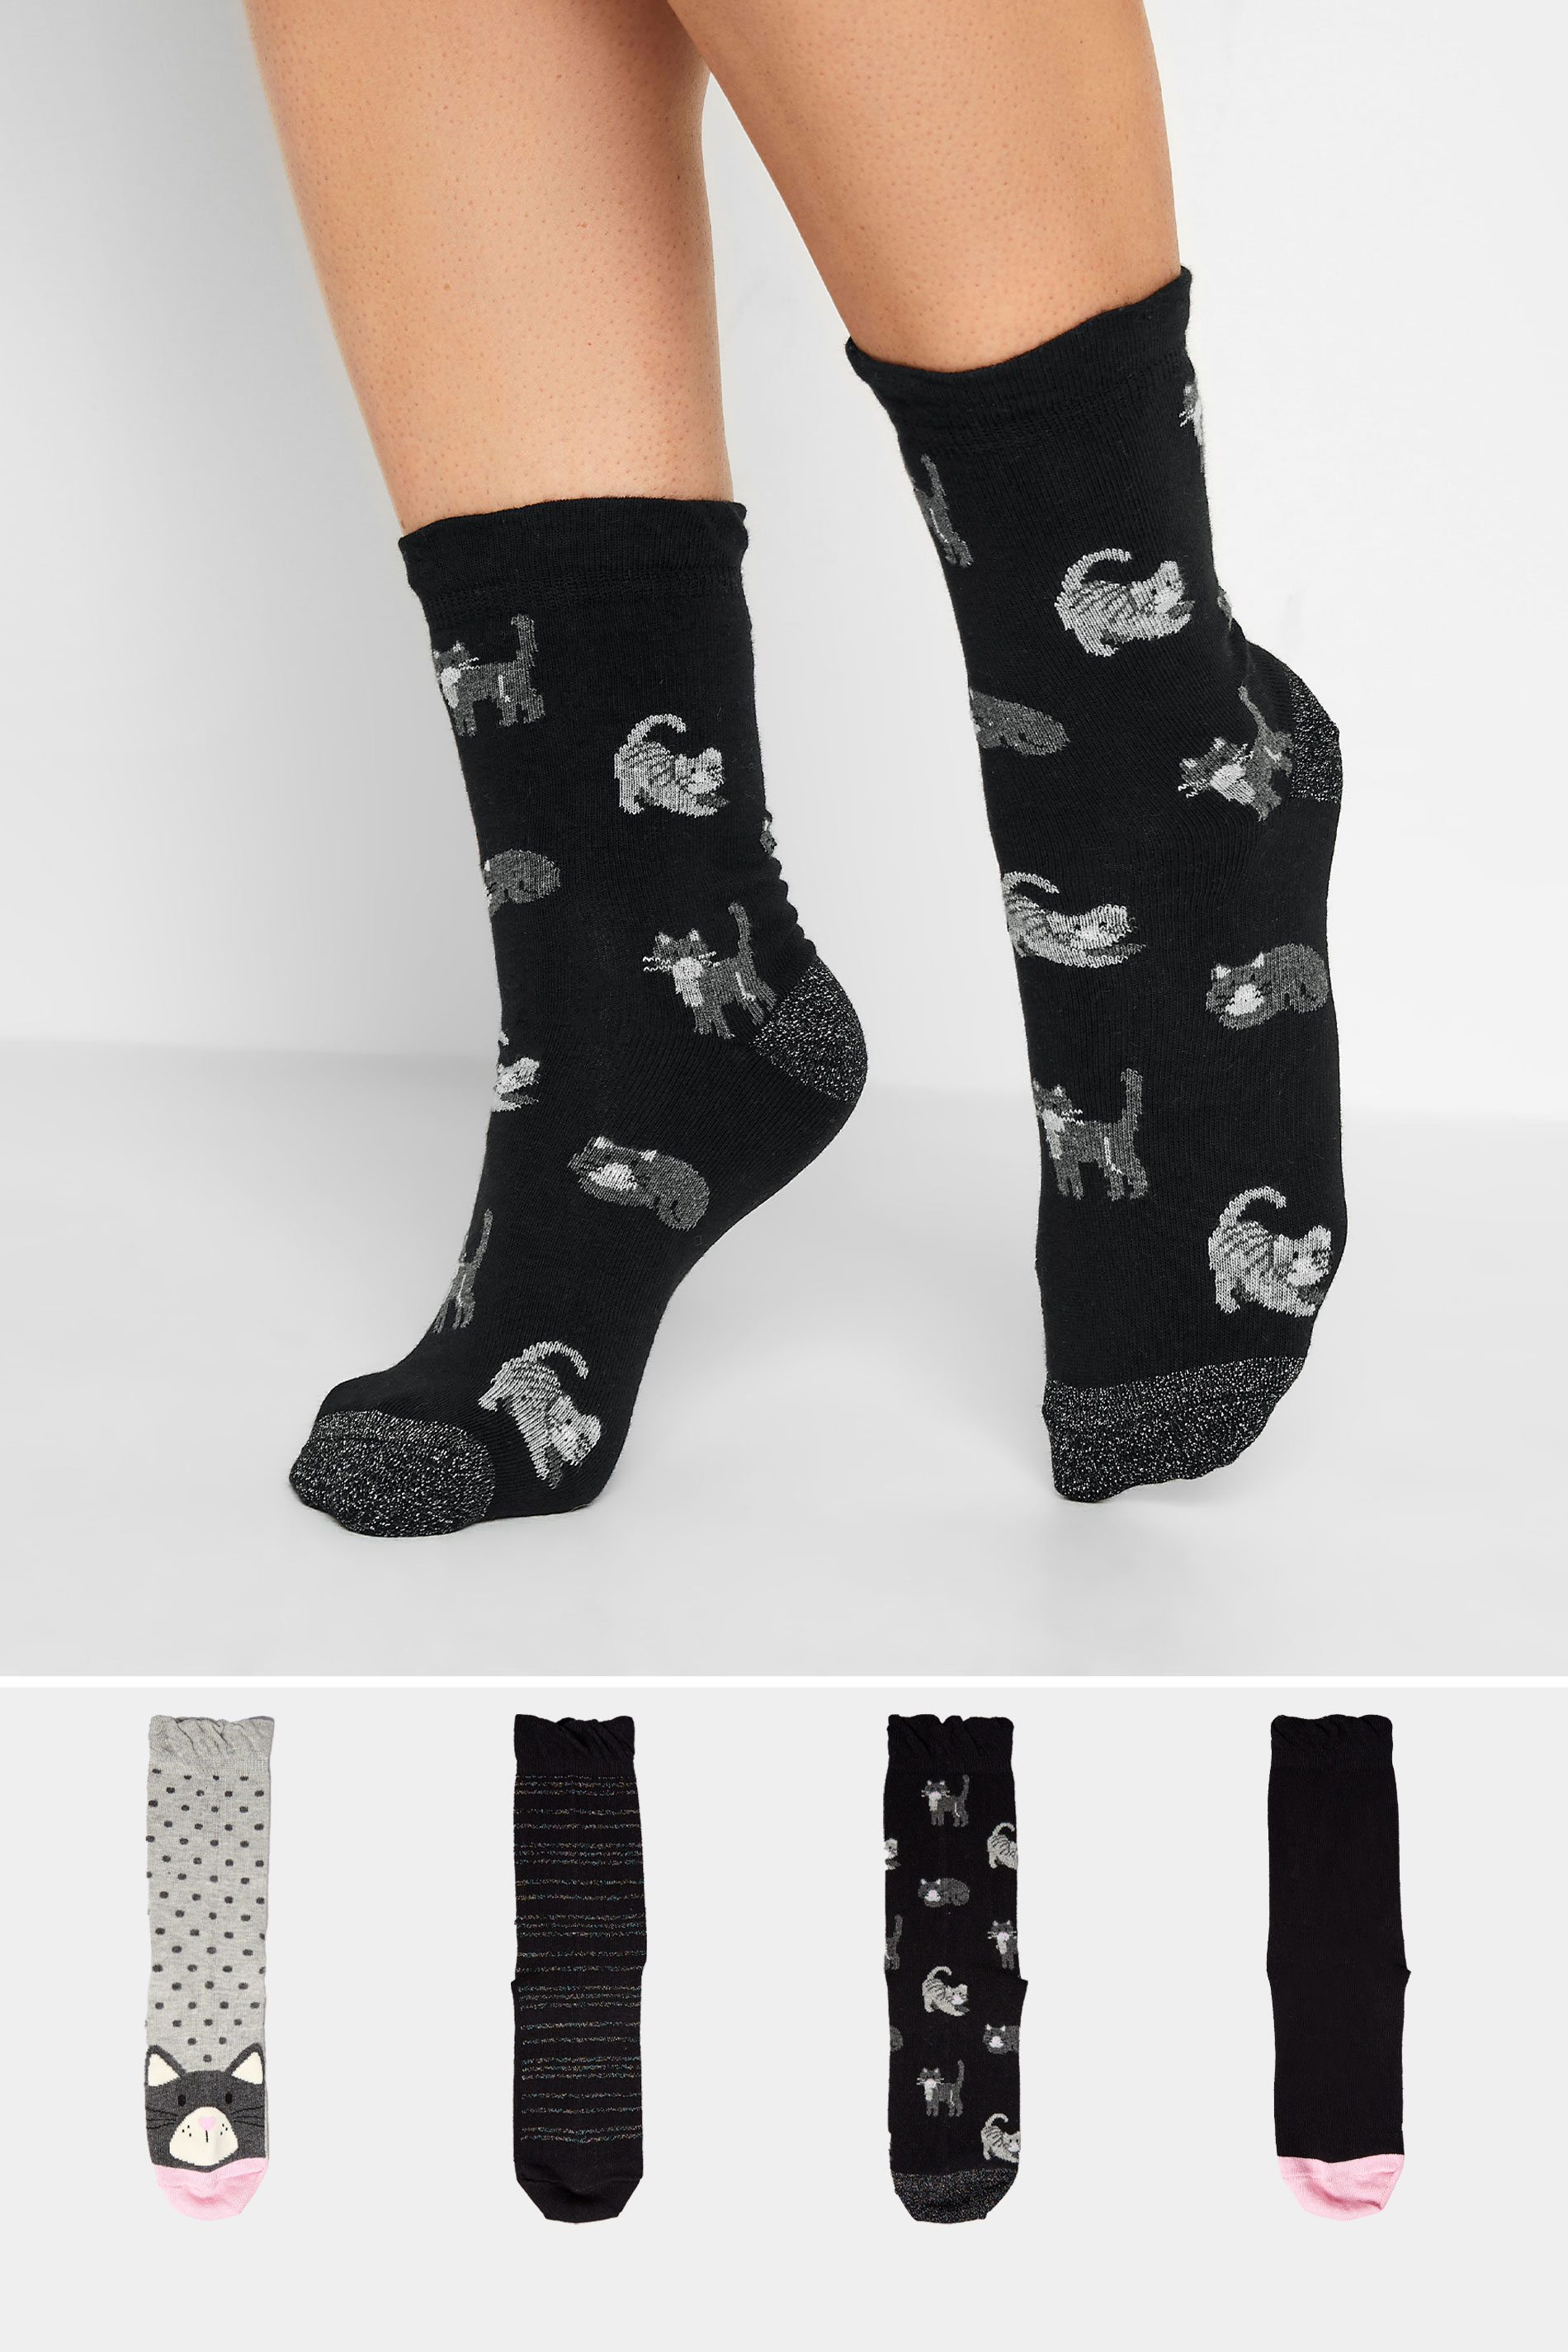 4 PACK Black Cat Print Ankle Socks | Yours Clothing  1